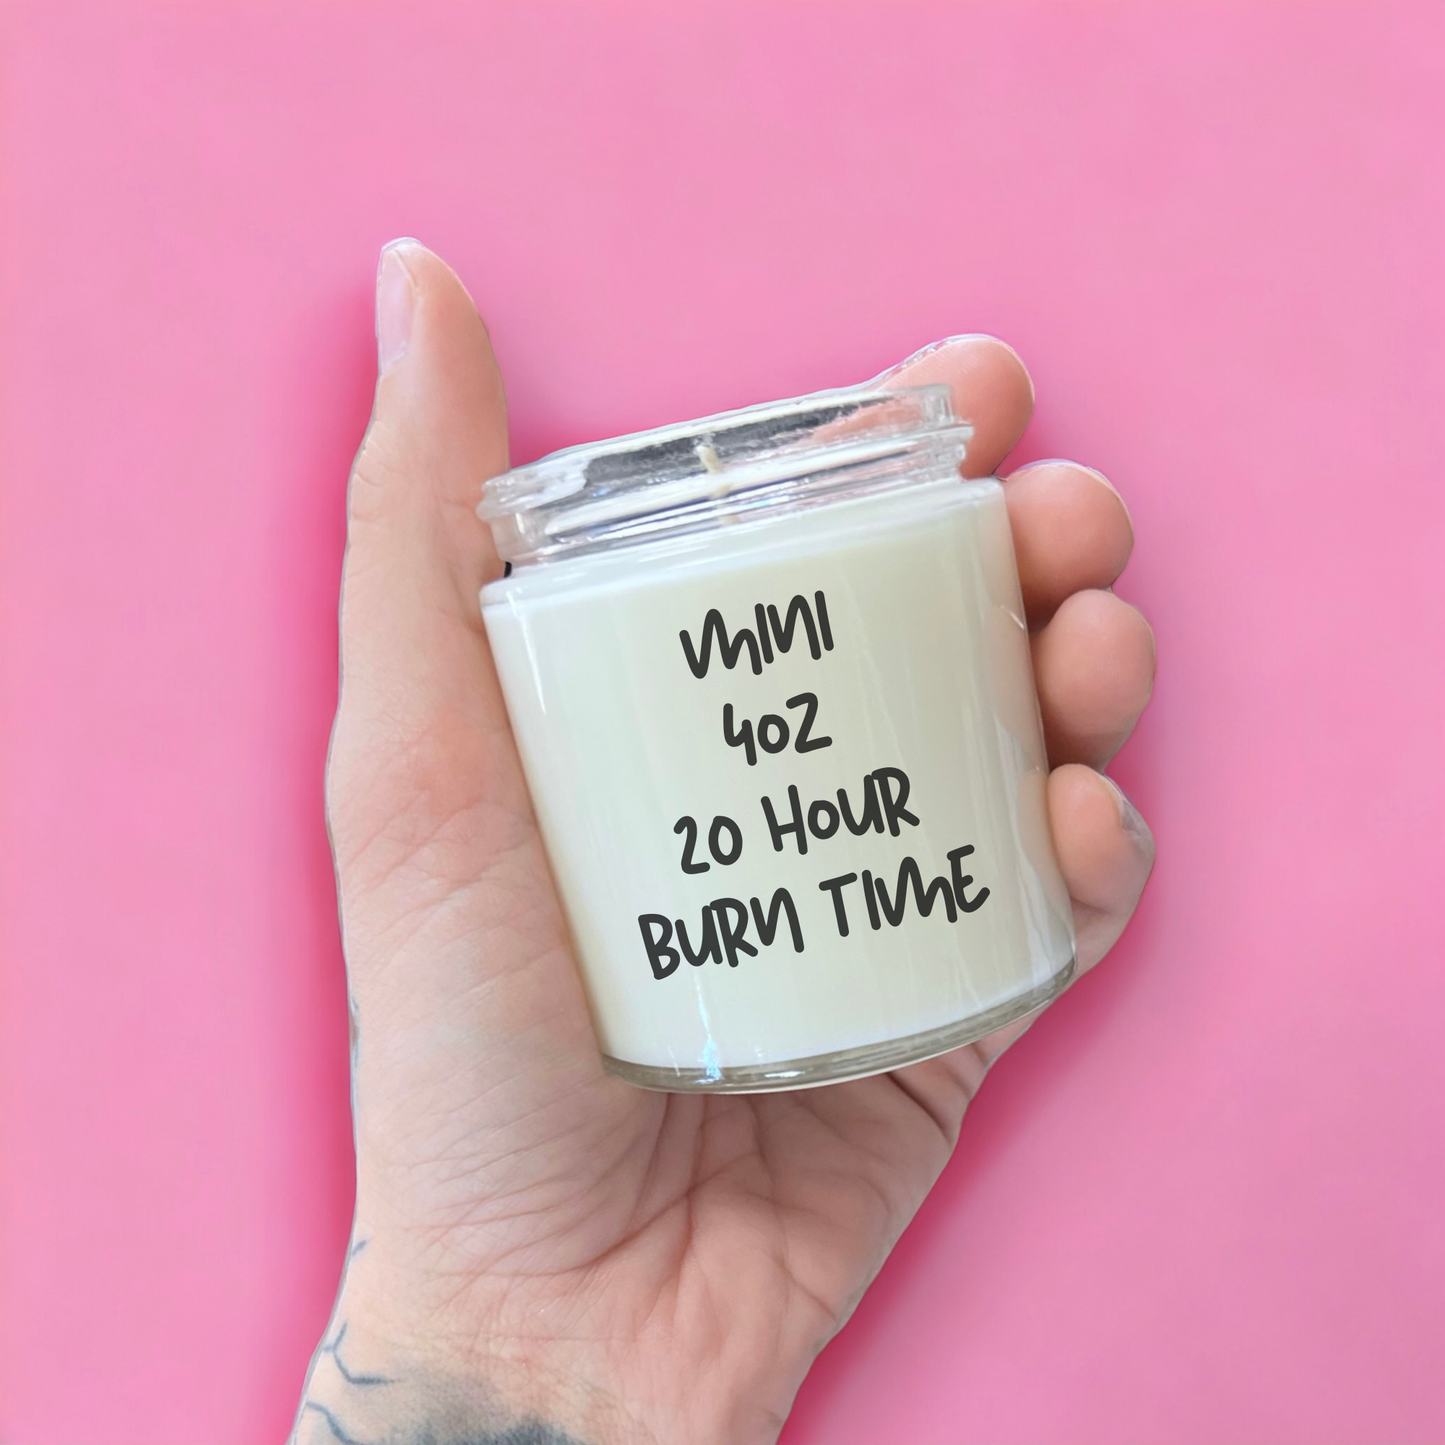 "Bad For My Liver" Funny Friendship Candle